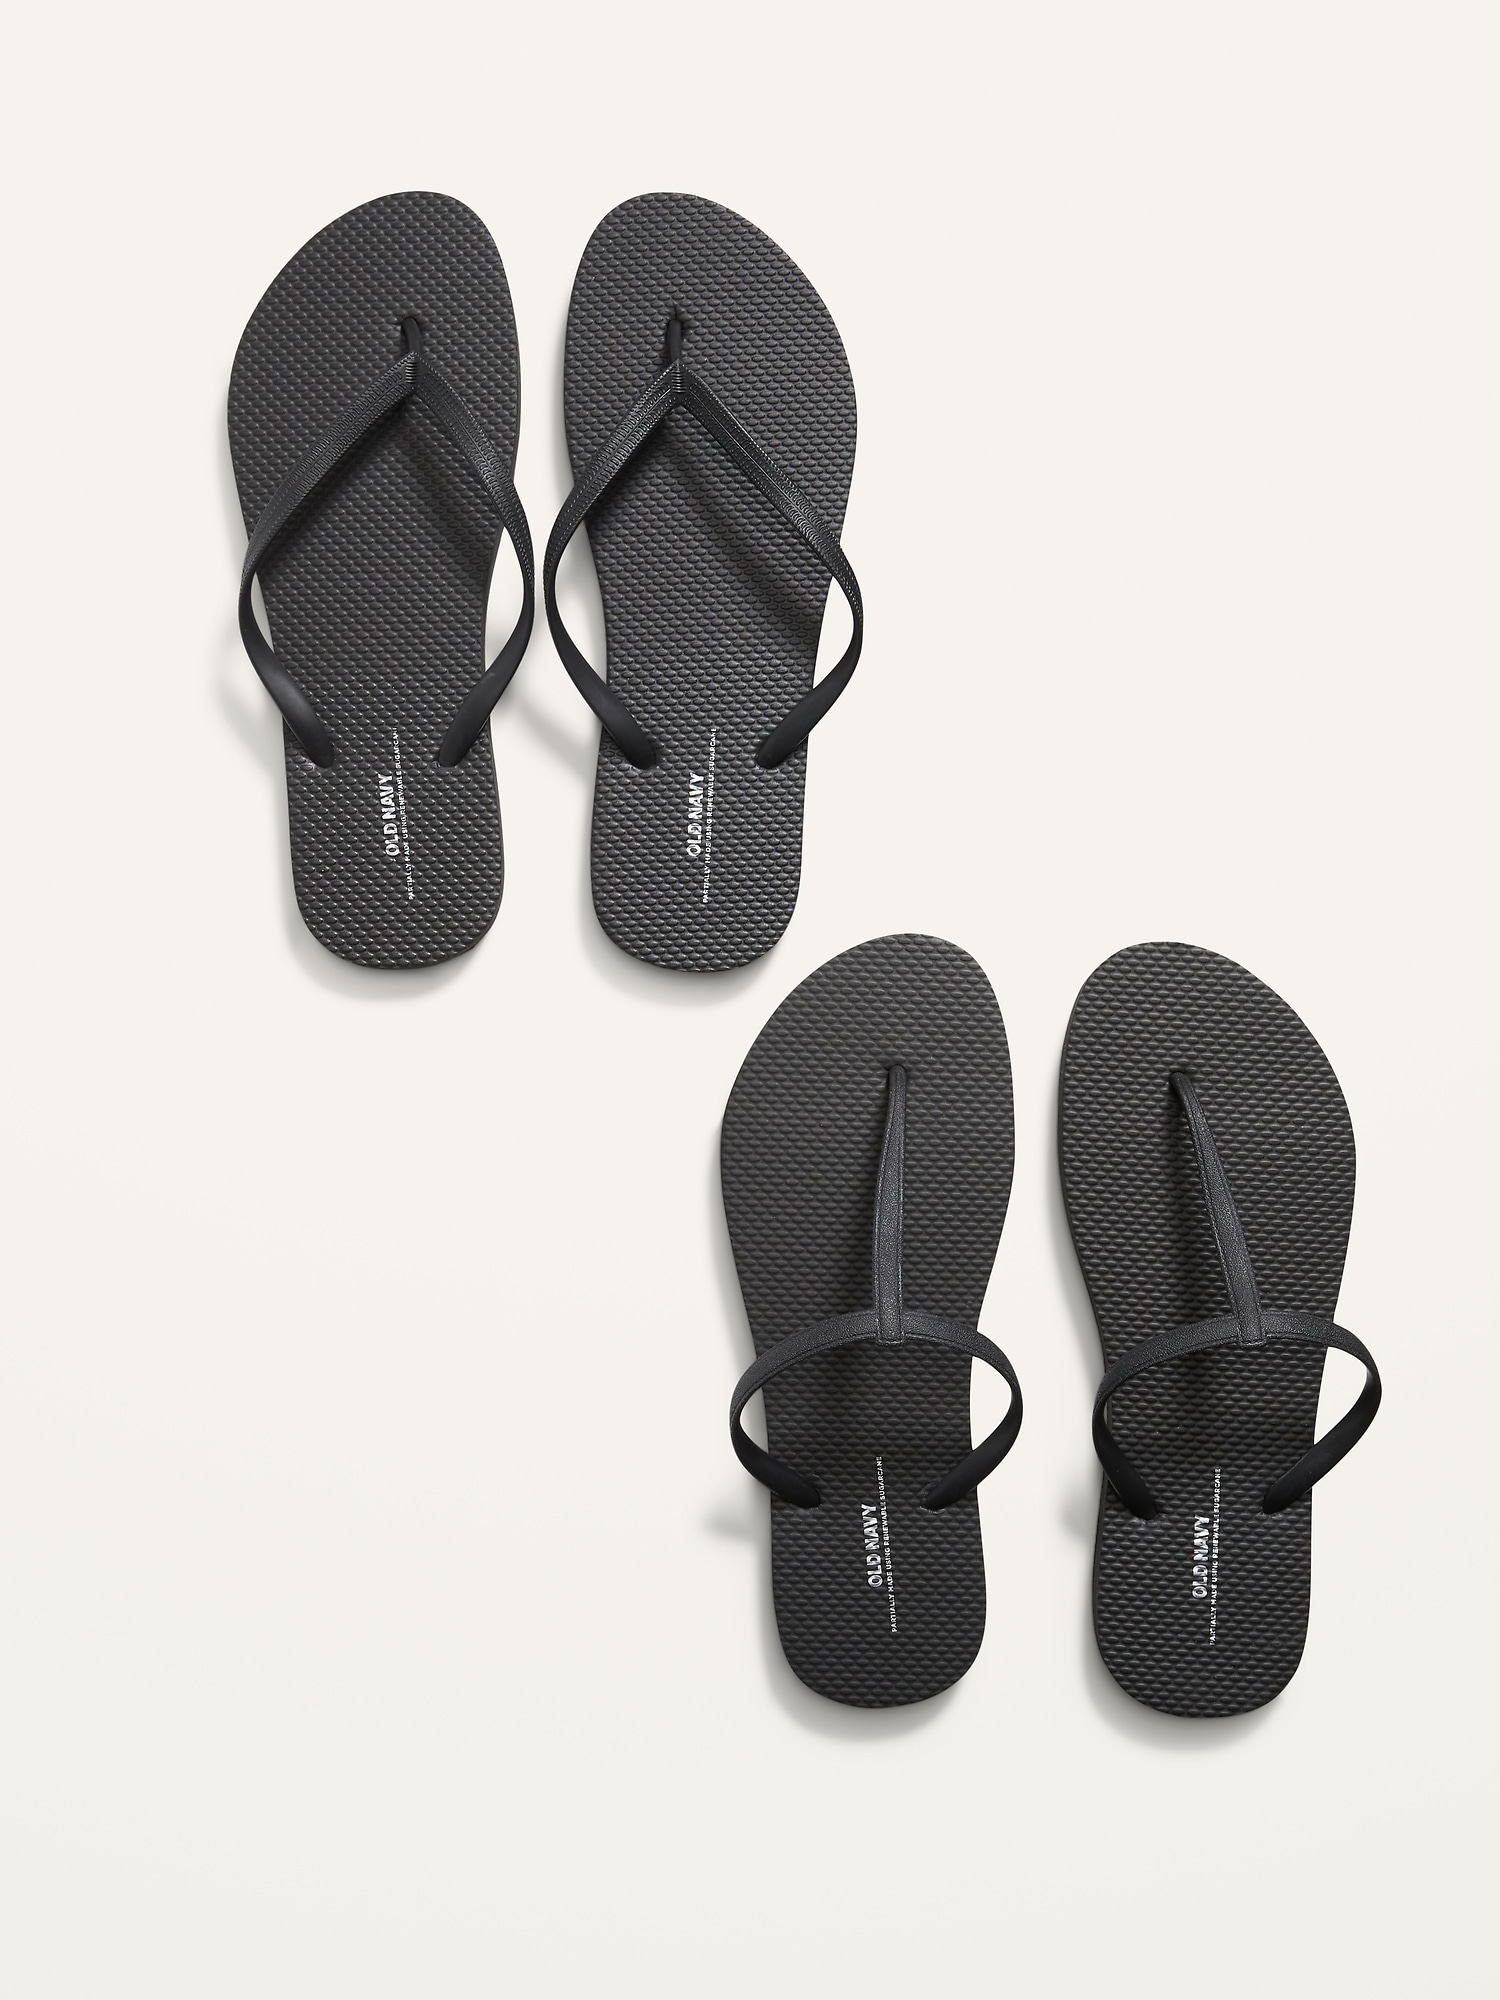 Old Navy Flip-Flop/T-Strap Sandals Variety 2-Pack (Partially Plant-Based) black. 1